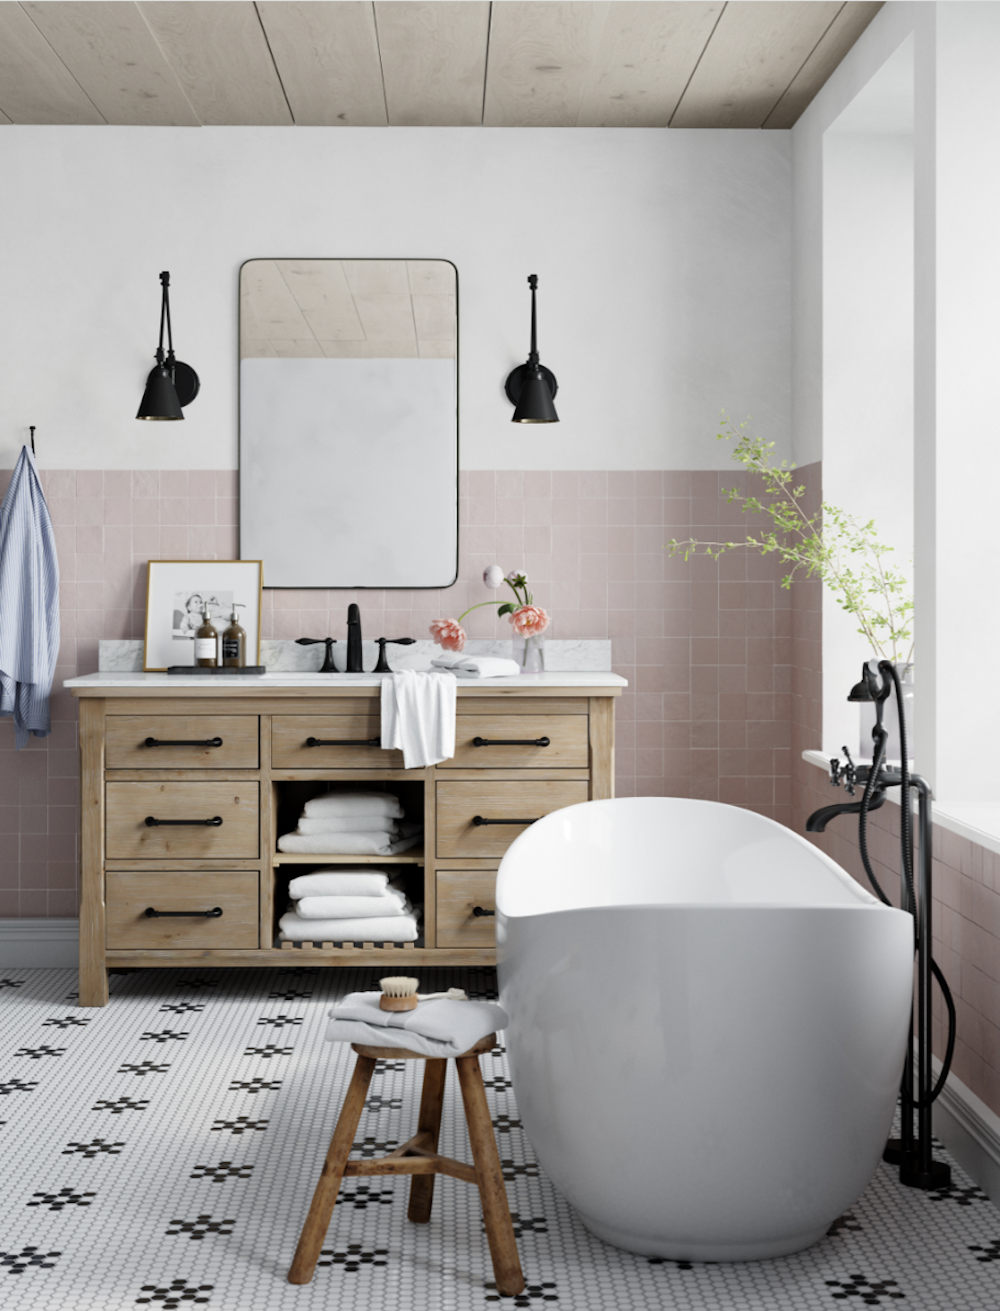 image of a bathroom with a wood vanity, stand alone tub, traditional tile, and half pink wall tile